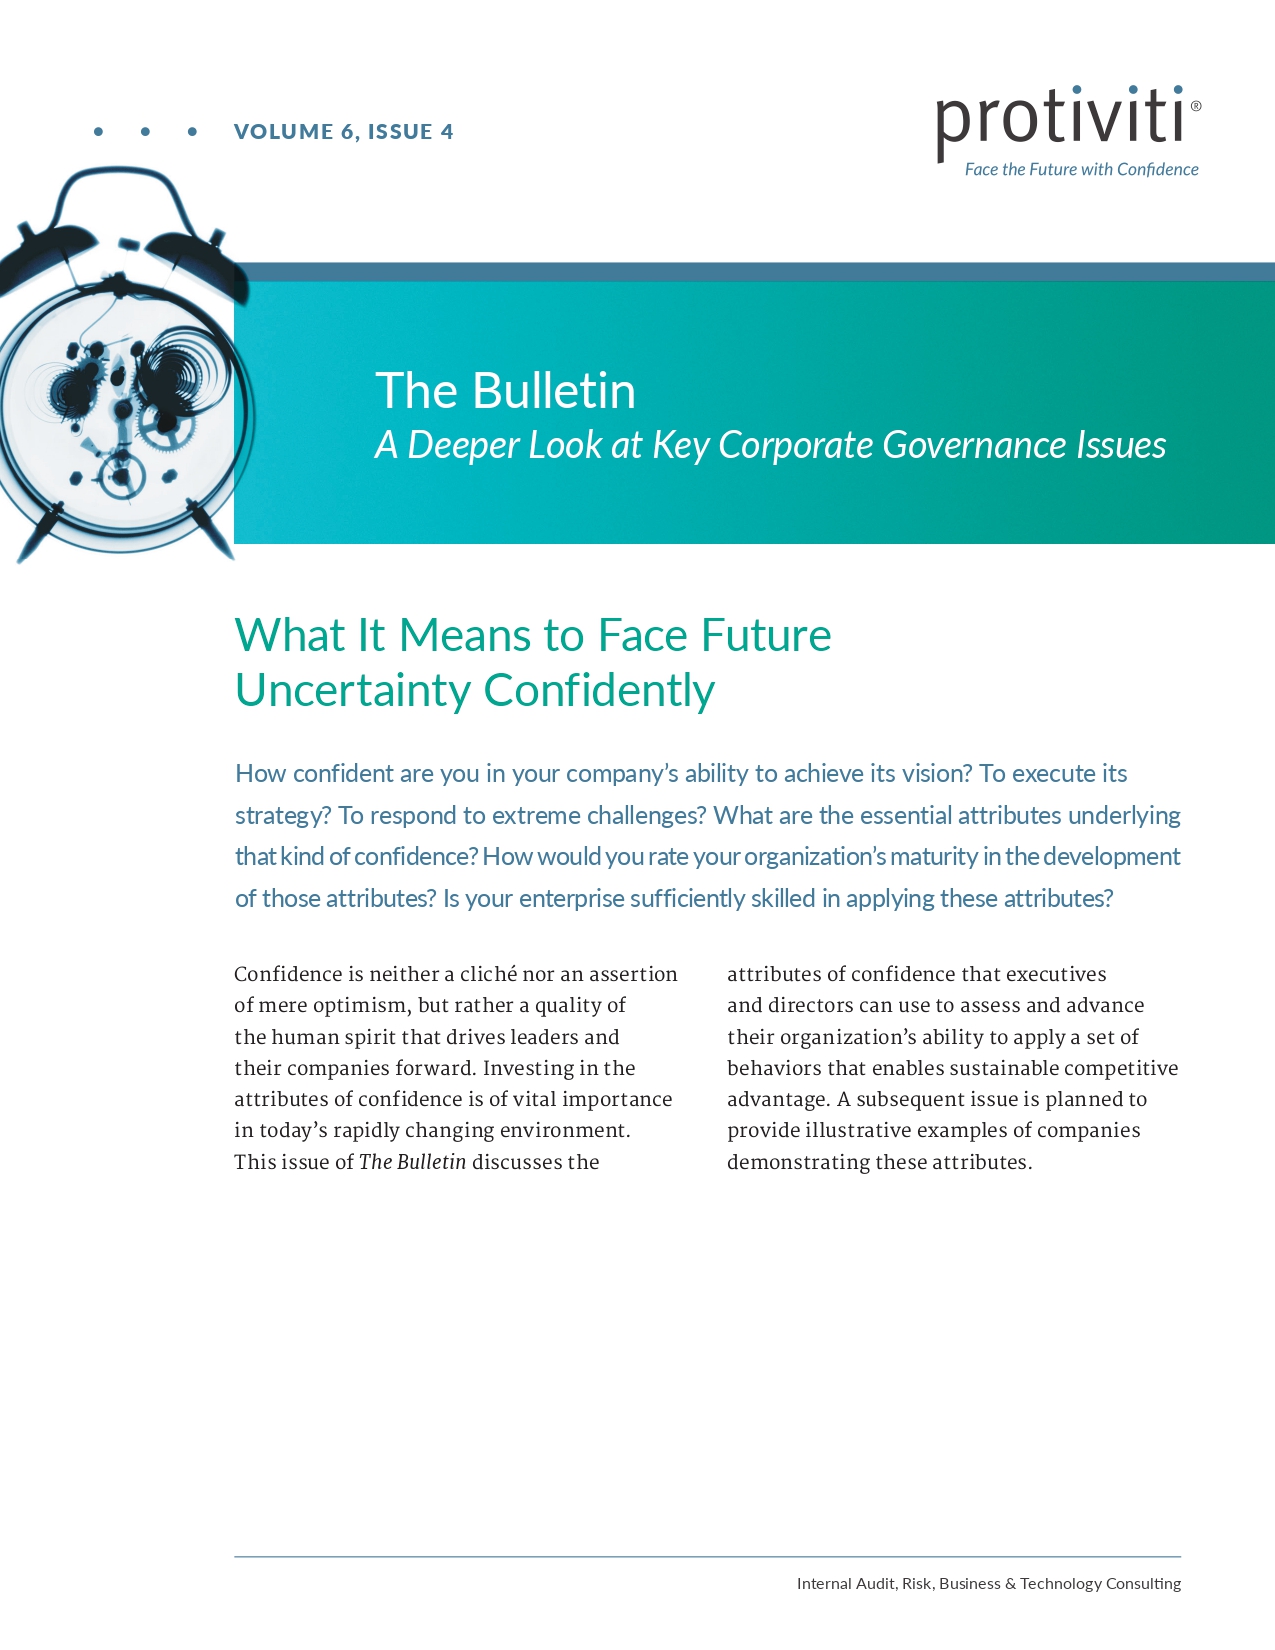 Screenshot of the first page of What It Means to Face Future Uncertainty Confidently